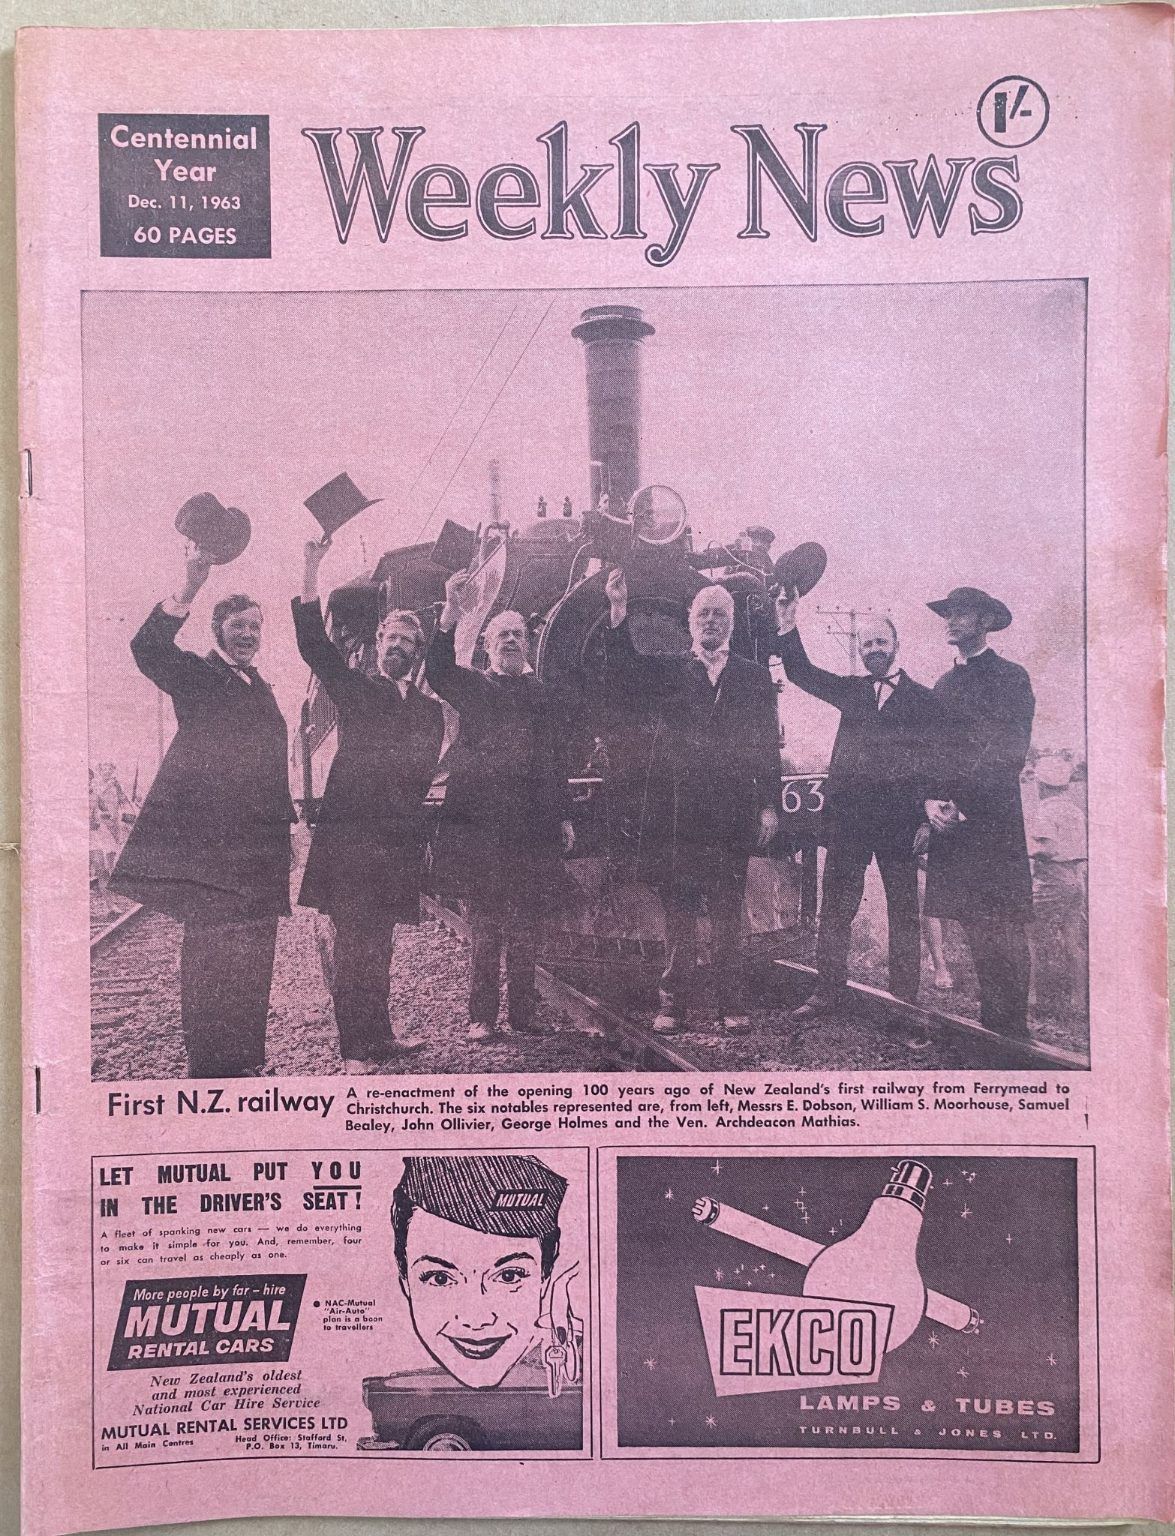 OLD NEWSPAPER: The Weekly News, No. 5220, 11 December 1963